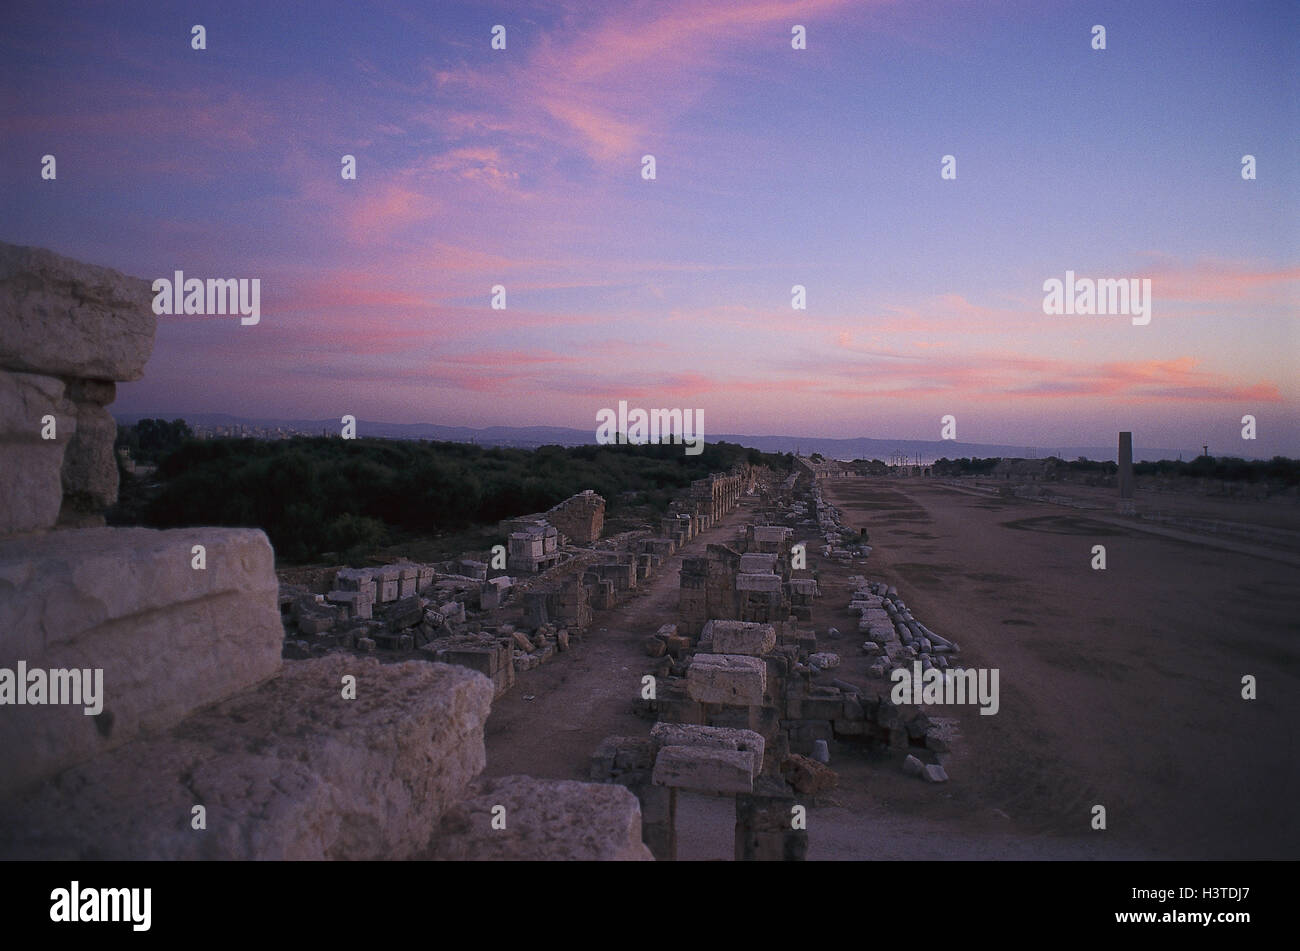 Lebanon, Tyros, tyre III, Hippodrom, evening light, the Middle East, front East, the Near East, Al bass, range III, ruin site, excavations, temple ruin, structure, architecture, architectural style, art, culture, place of interest, dusk Stock Photo